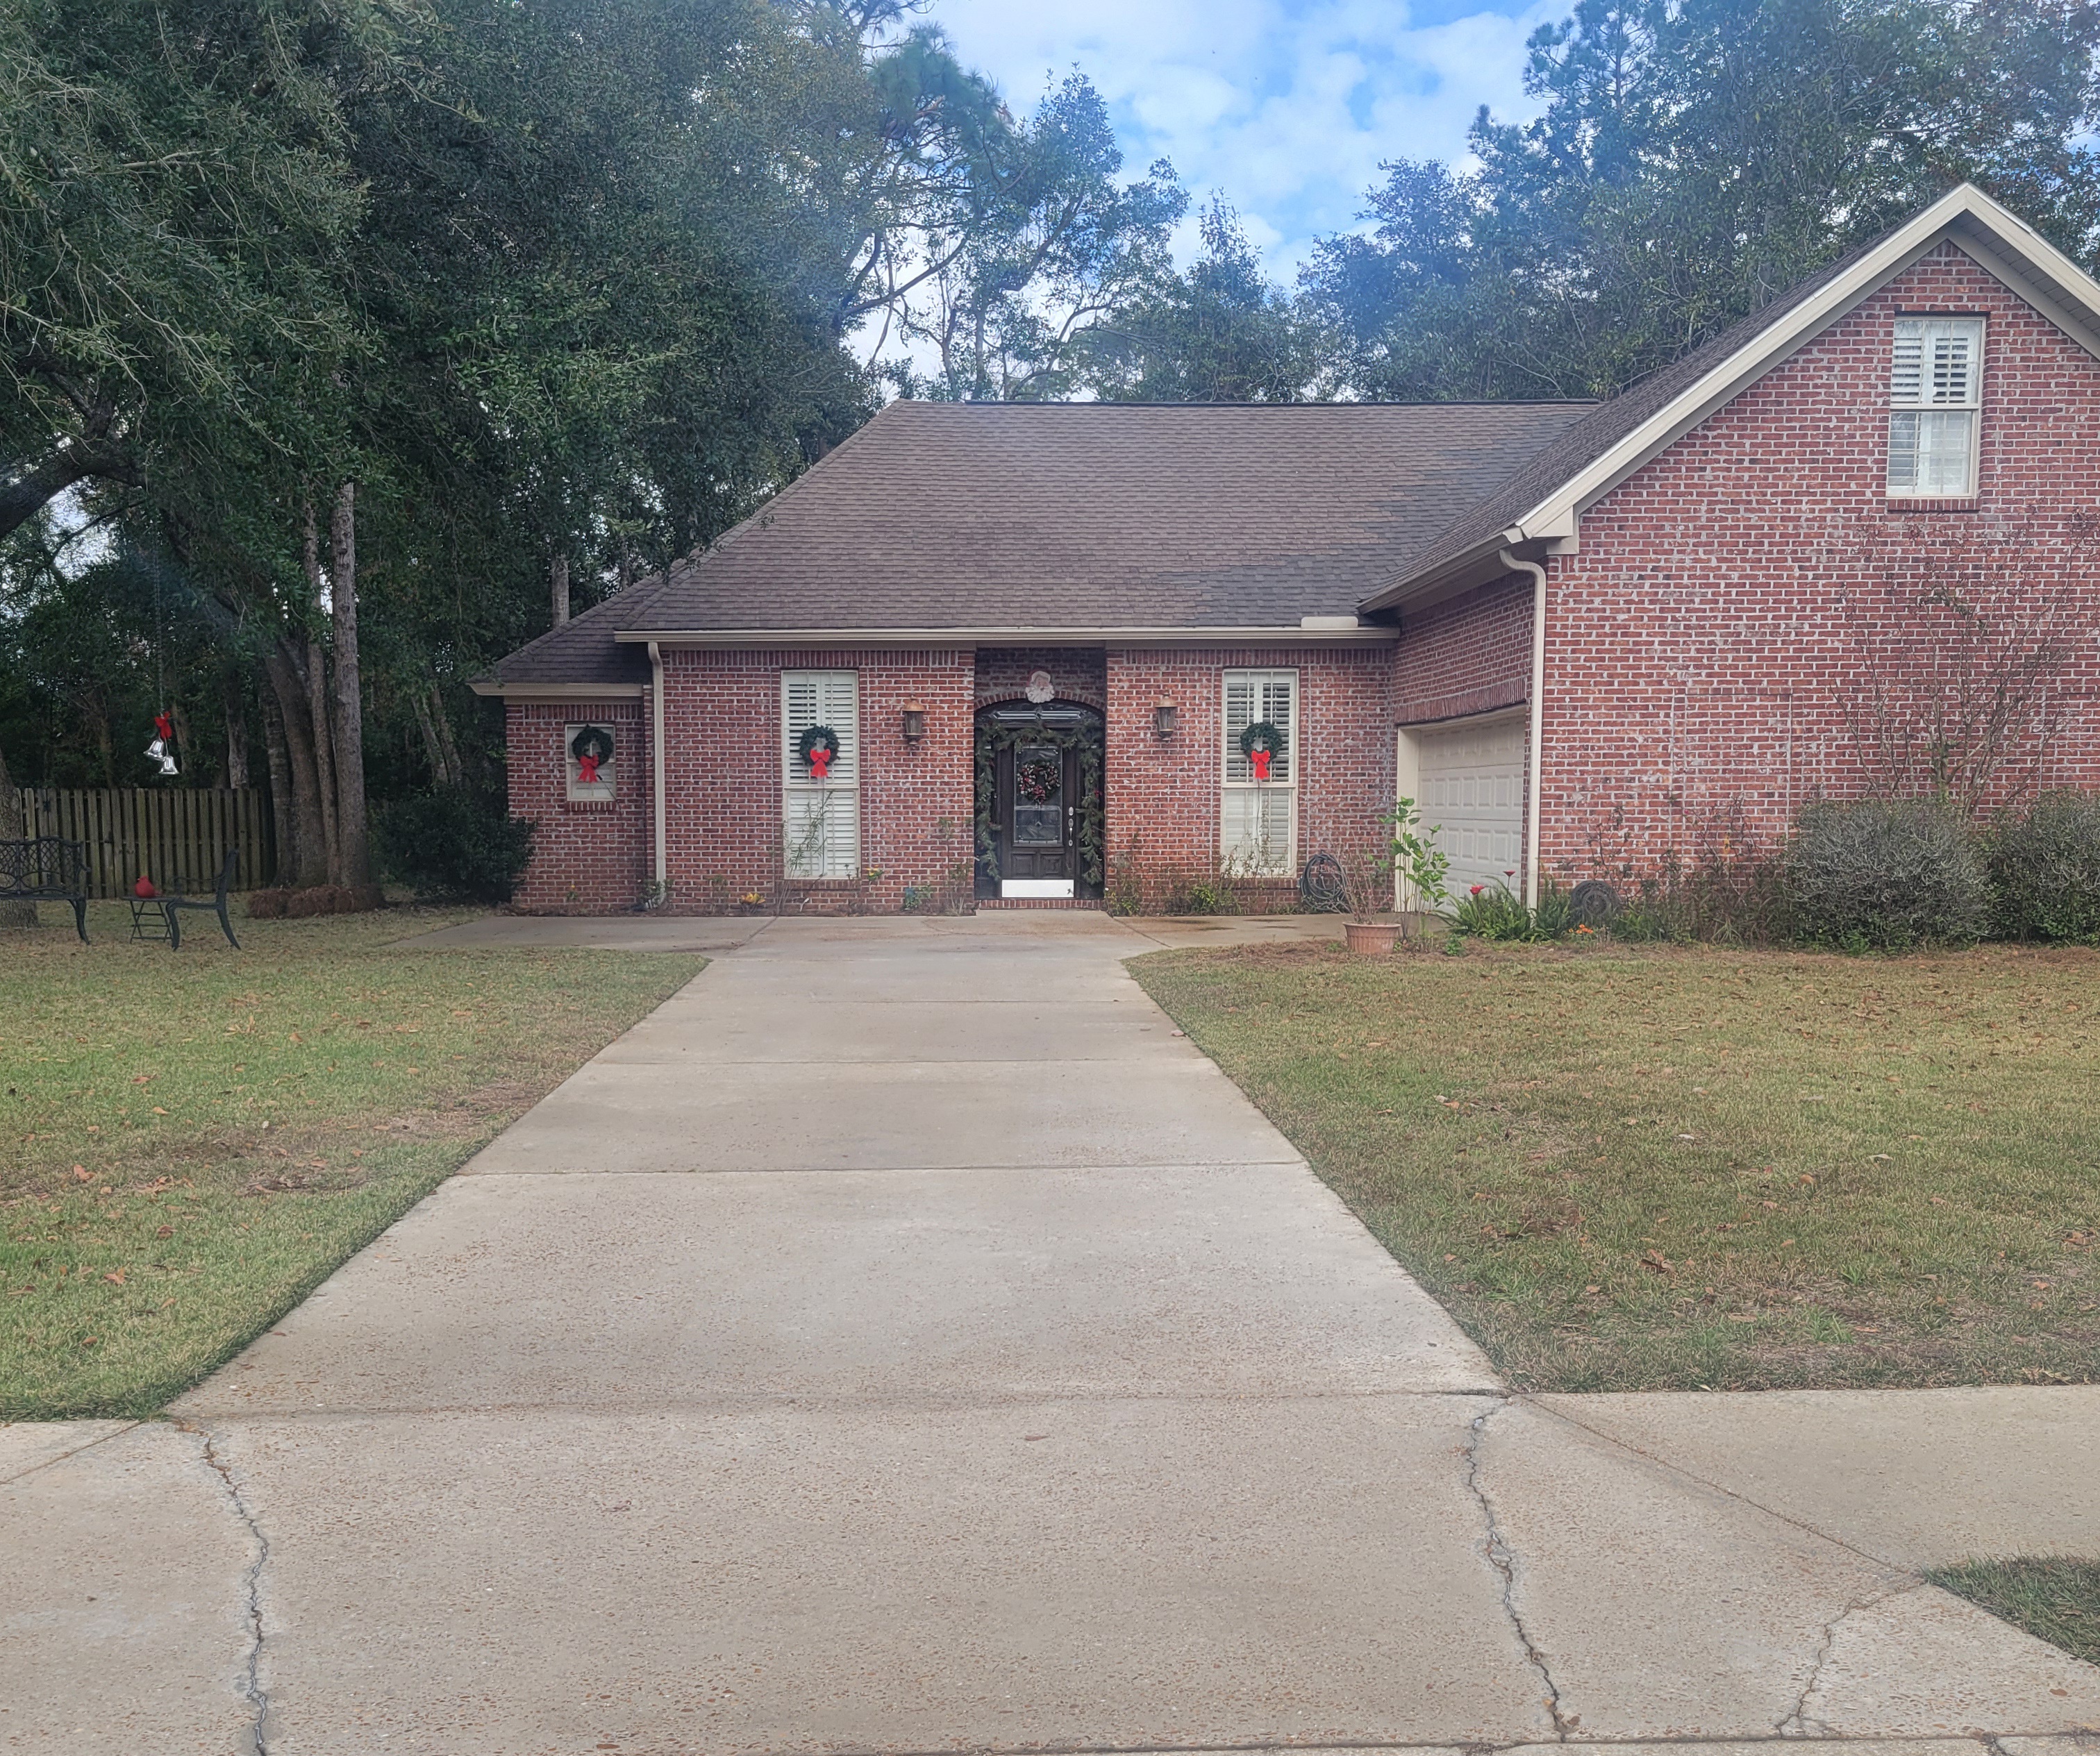 Professional Driveway and Sidewalk Cleaning Completed in Fairhope, AL